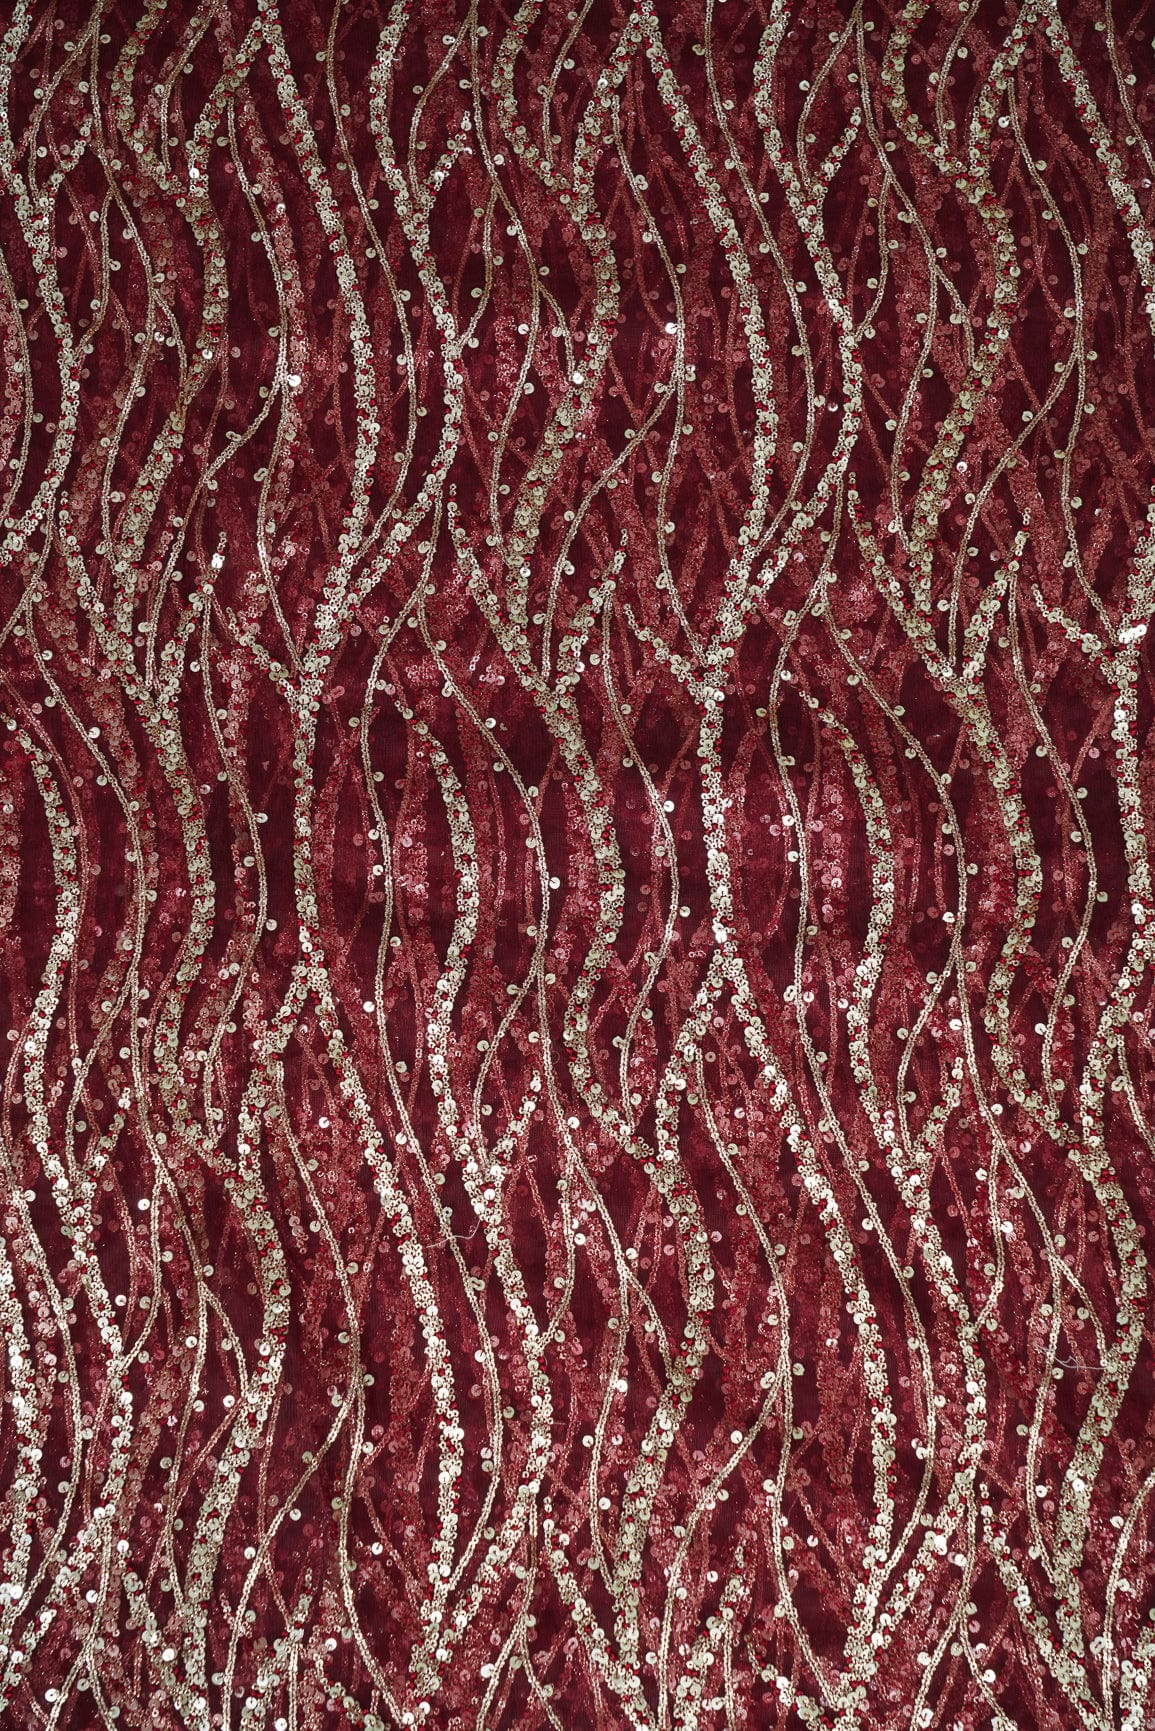 doeraa Embroidery Fabrics Gold Sequins With Maroon Thread Embroidery On Maroon Soft Net